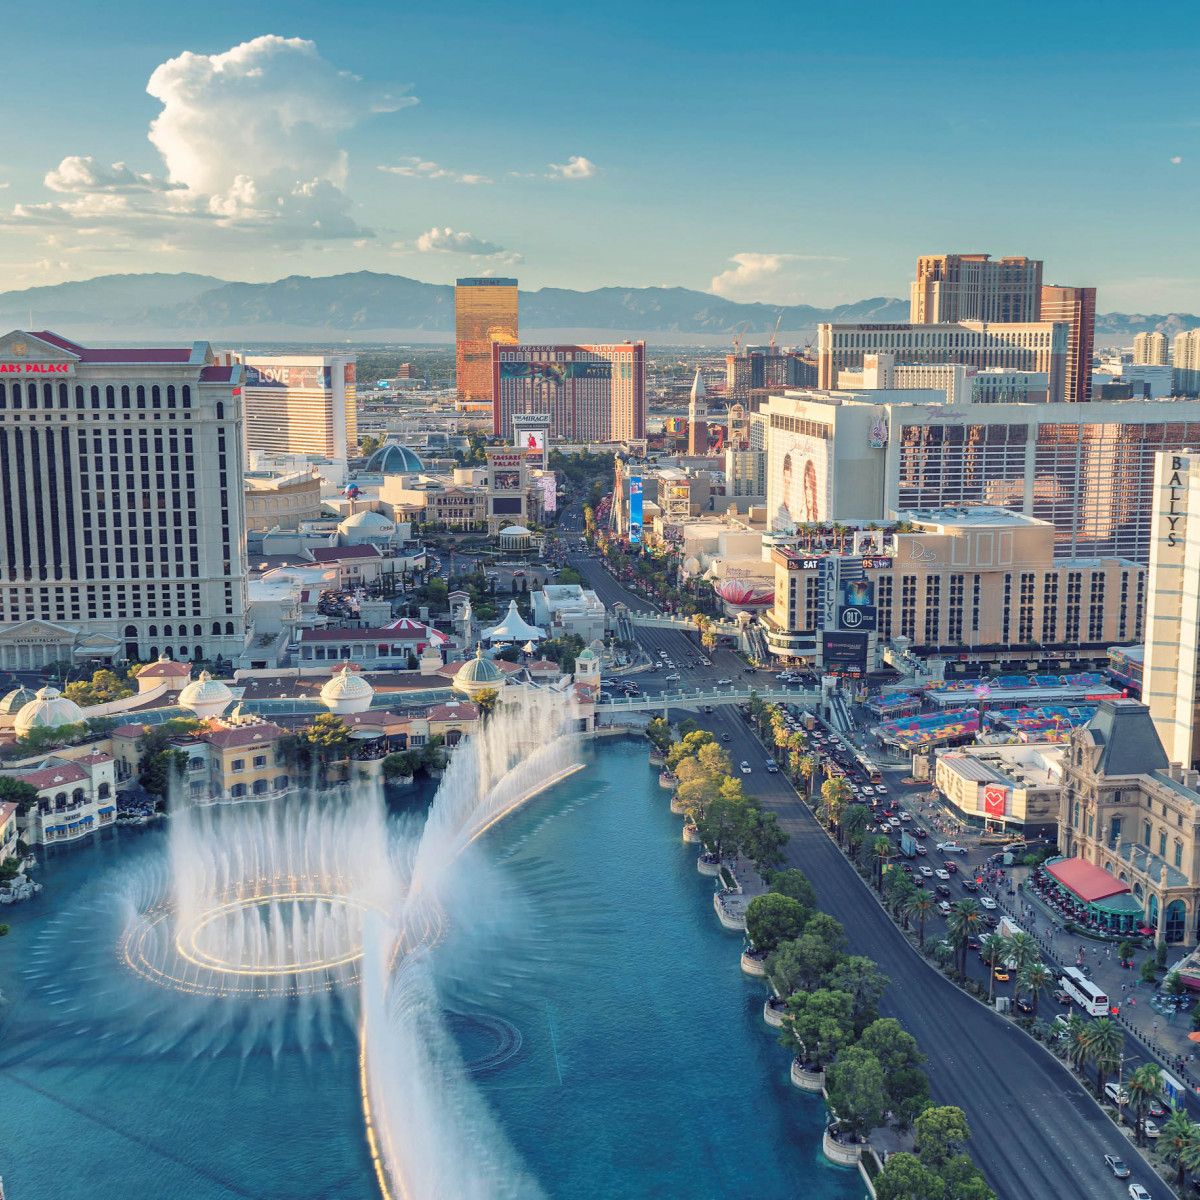 Things to Do in Las Vegas During First Visit, From Frequent Visitor